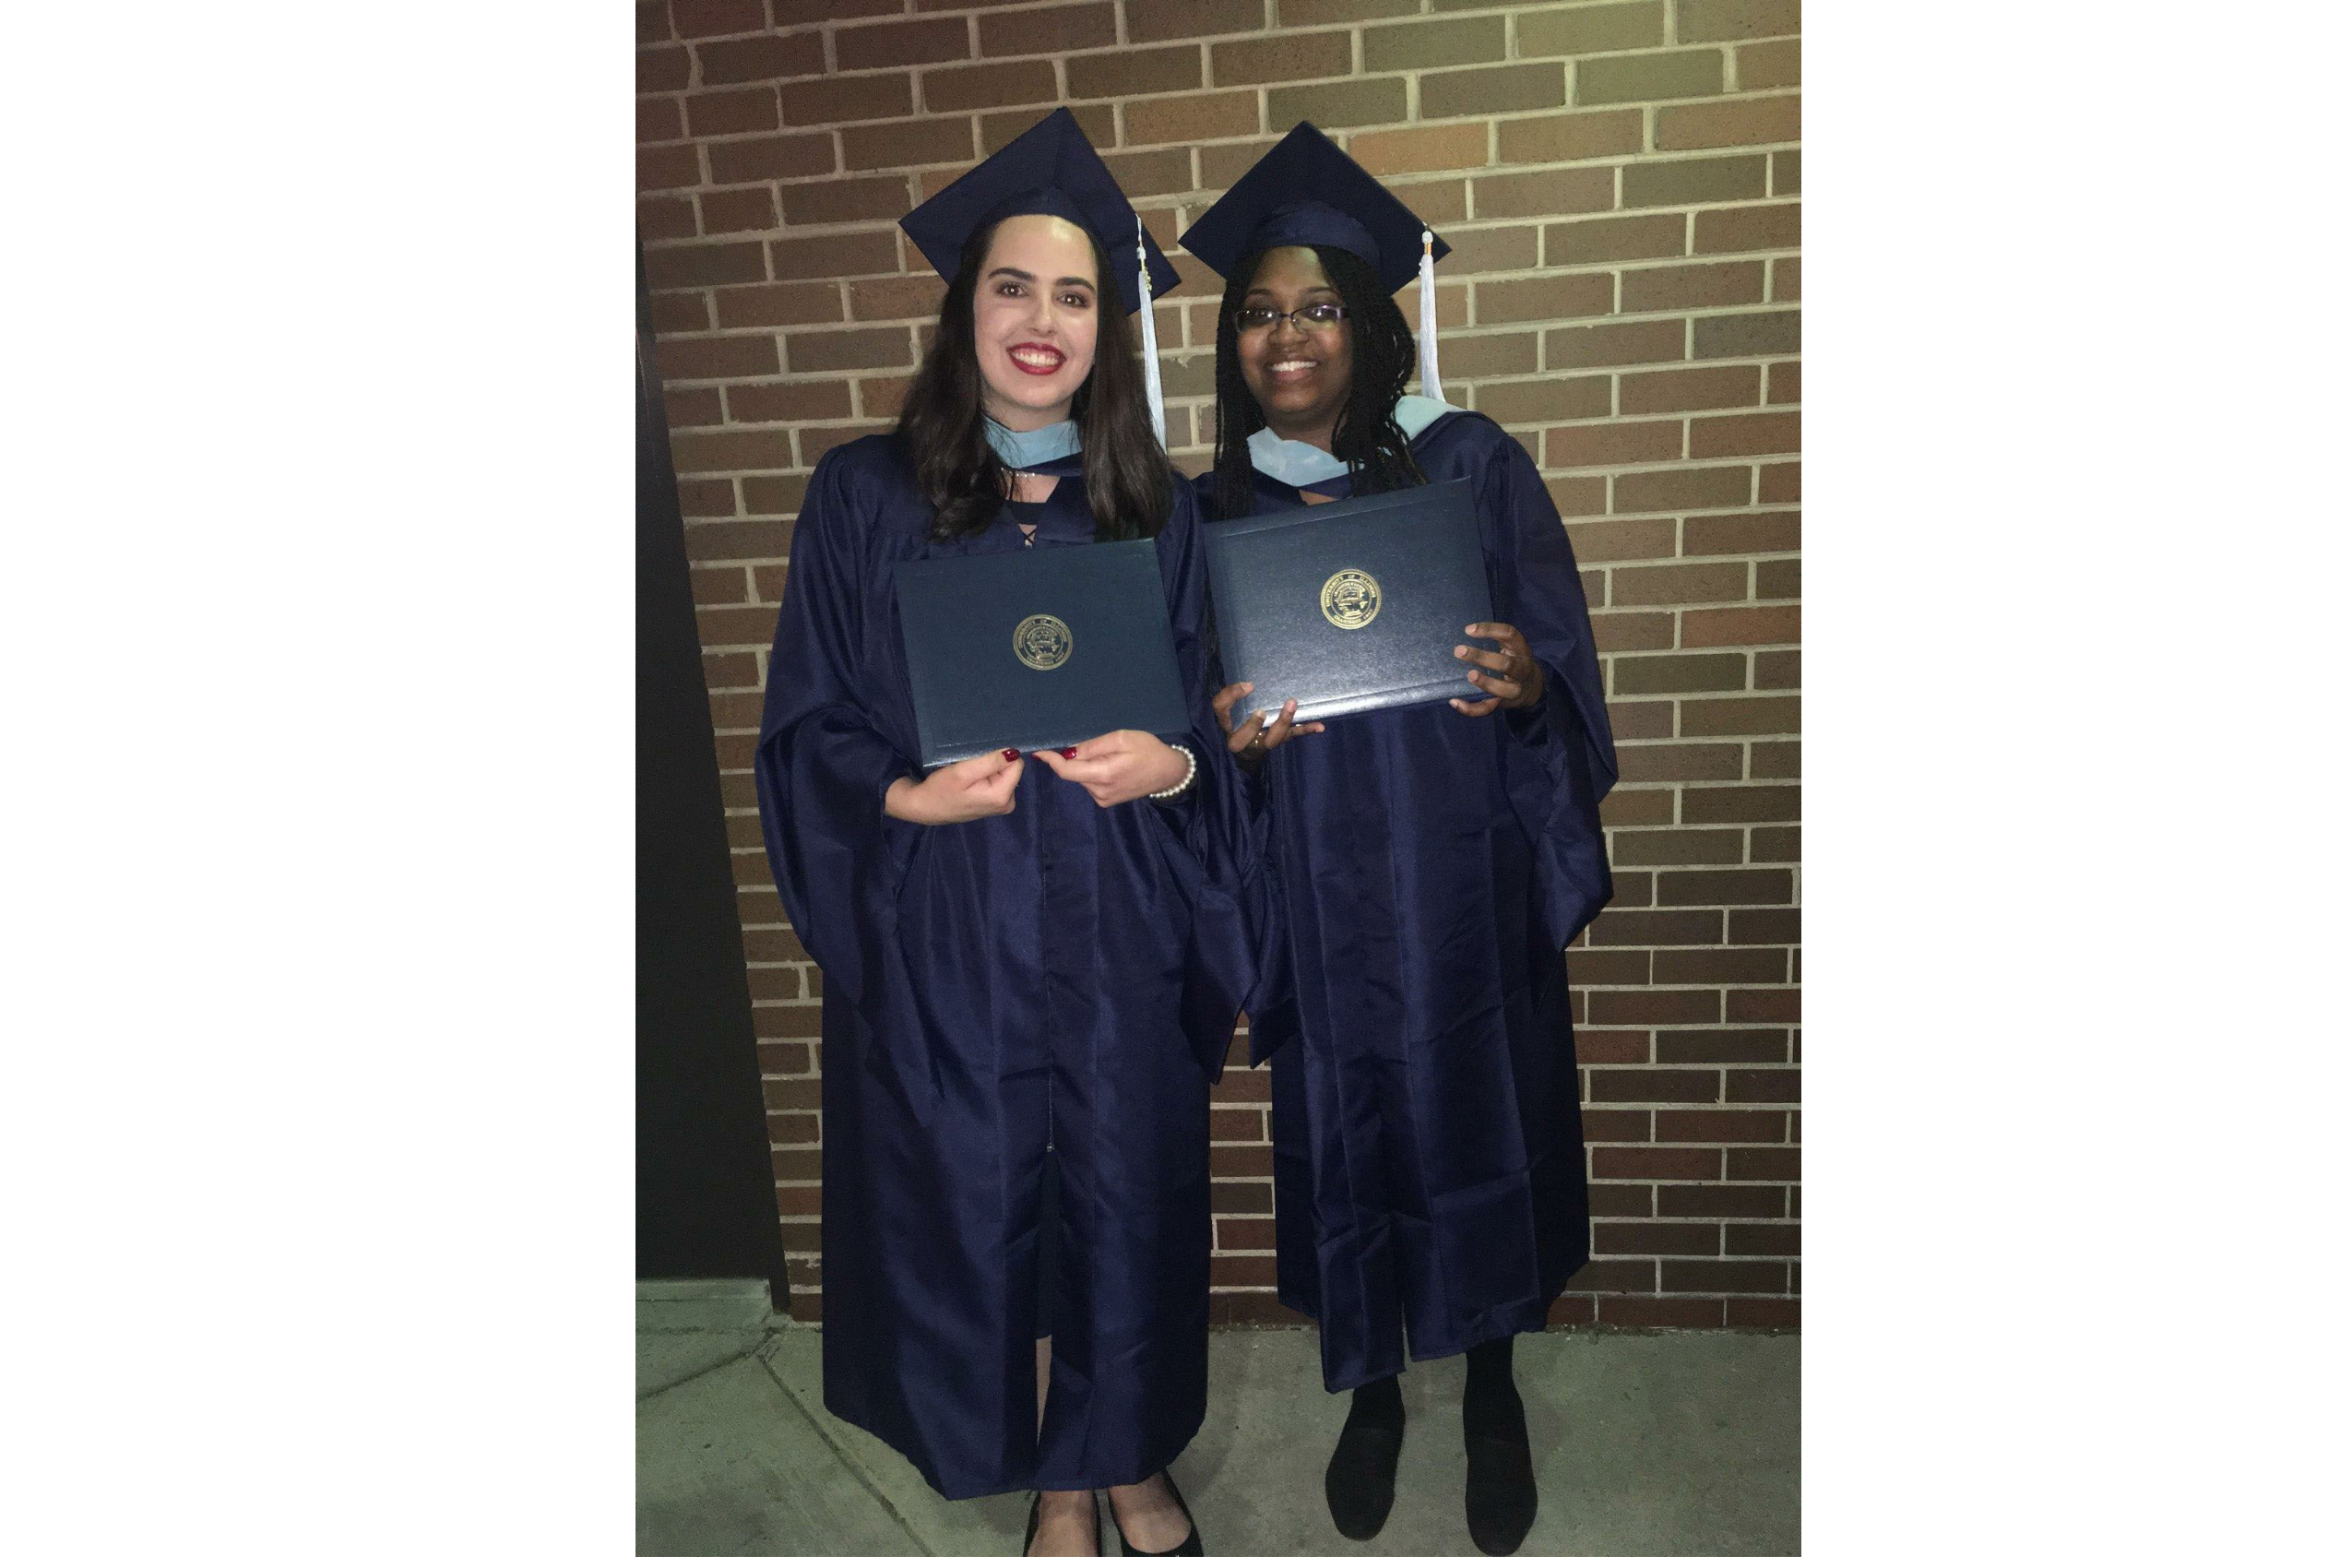 two young women stand side-by-side, wearing graduation caps and gowns, holding their diplomas